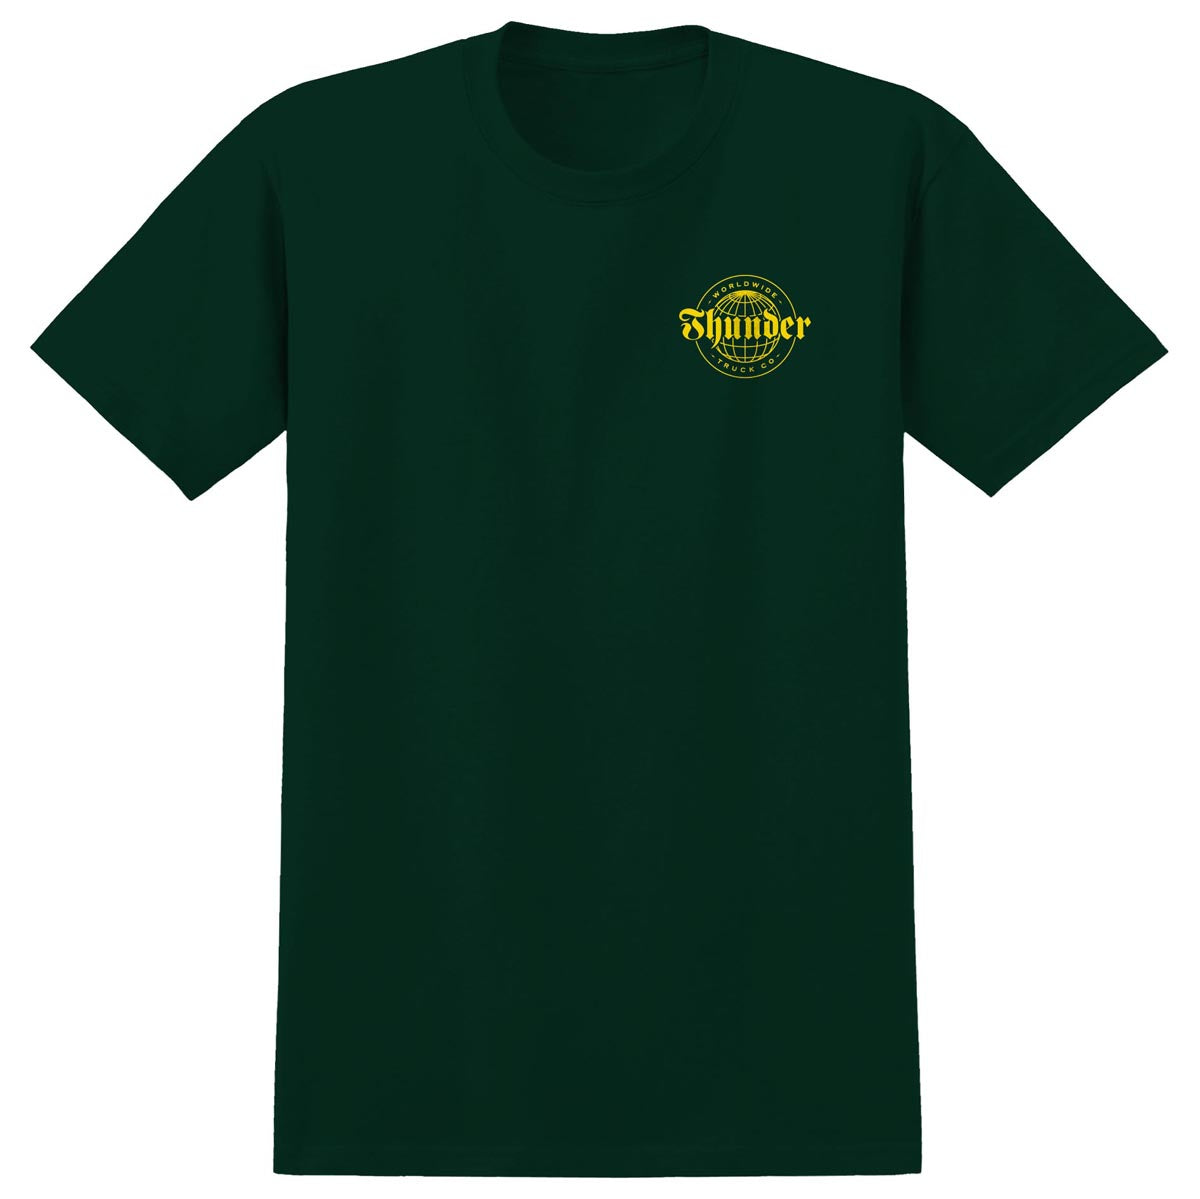 Thunder Worldwide Dbl T-Shirt - Forest Green/Yellow image 2